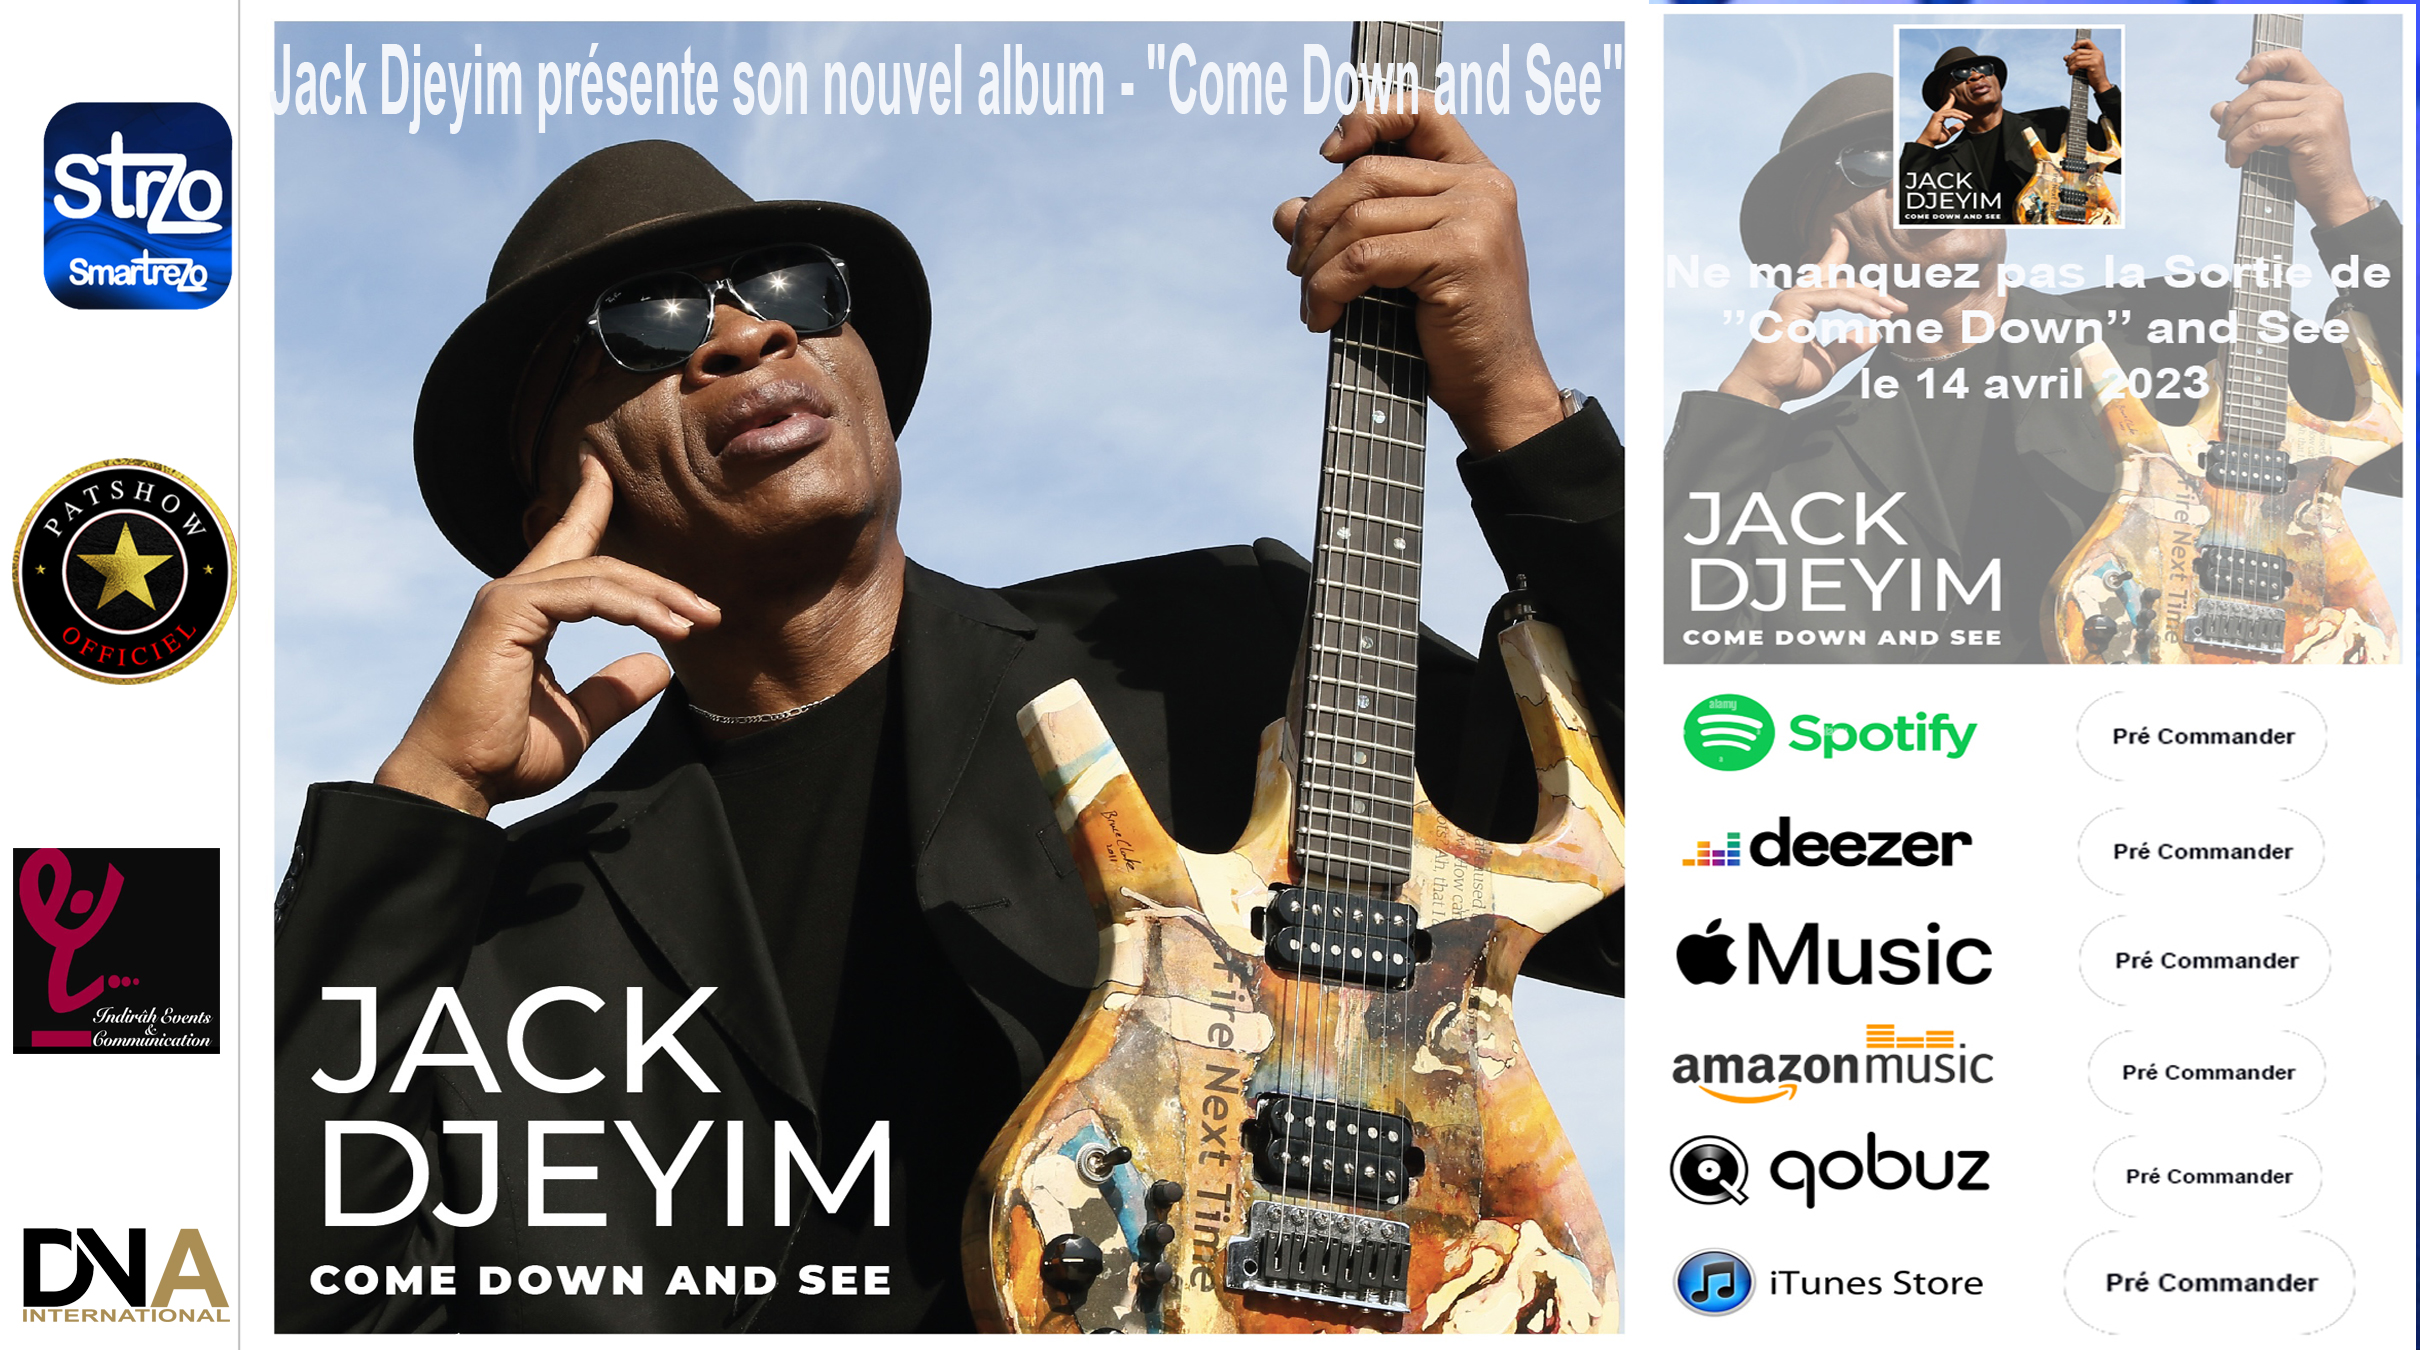 SPOTIFY-AFRICA-VOGUE-COVER-Jack-Djeyim-presents-his-new-album- Come-Down-and-See--DN-AFRICA-DN-A-INTERNATIONAL-Media-Partenaire